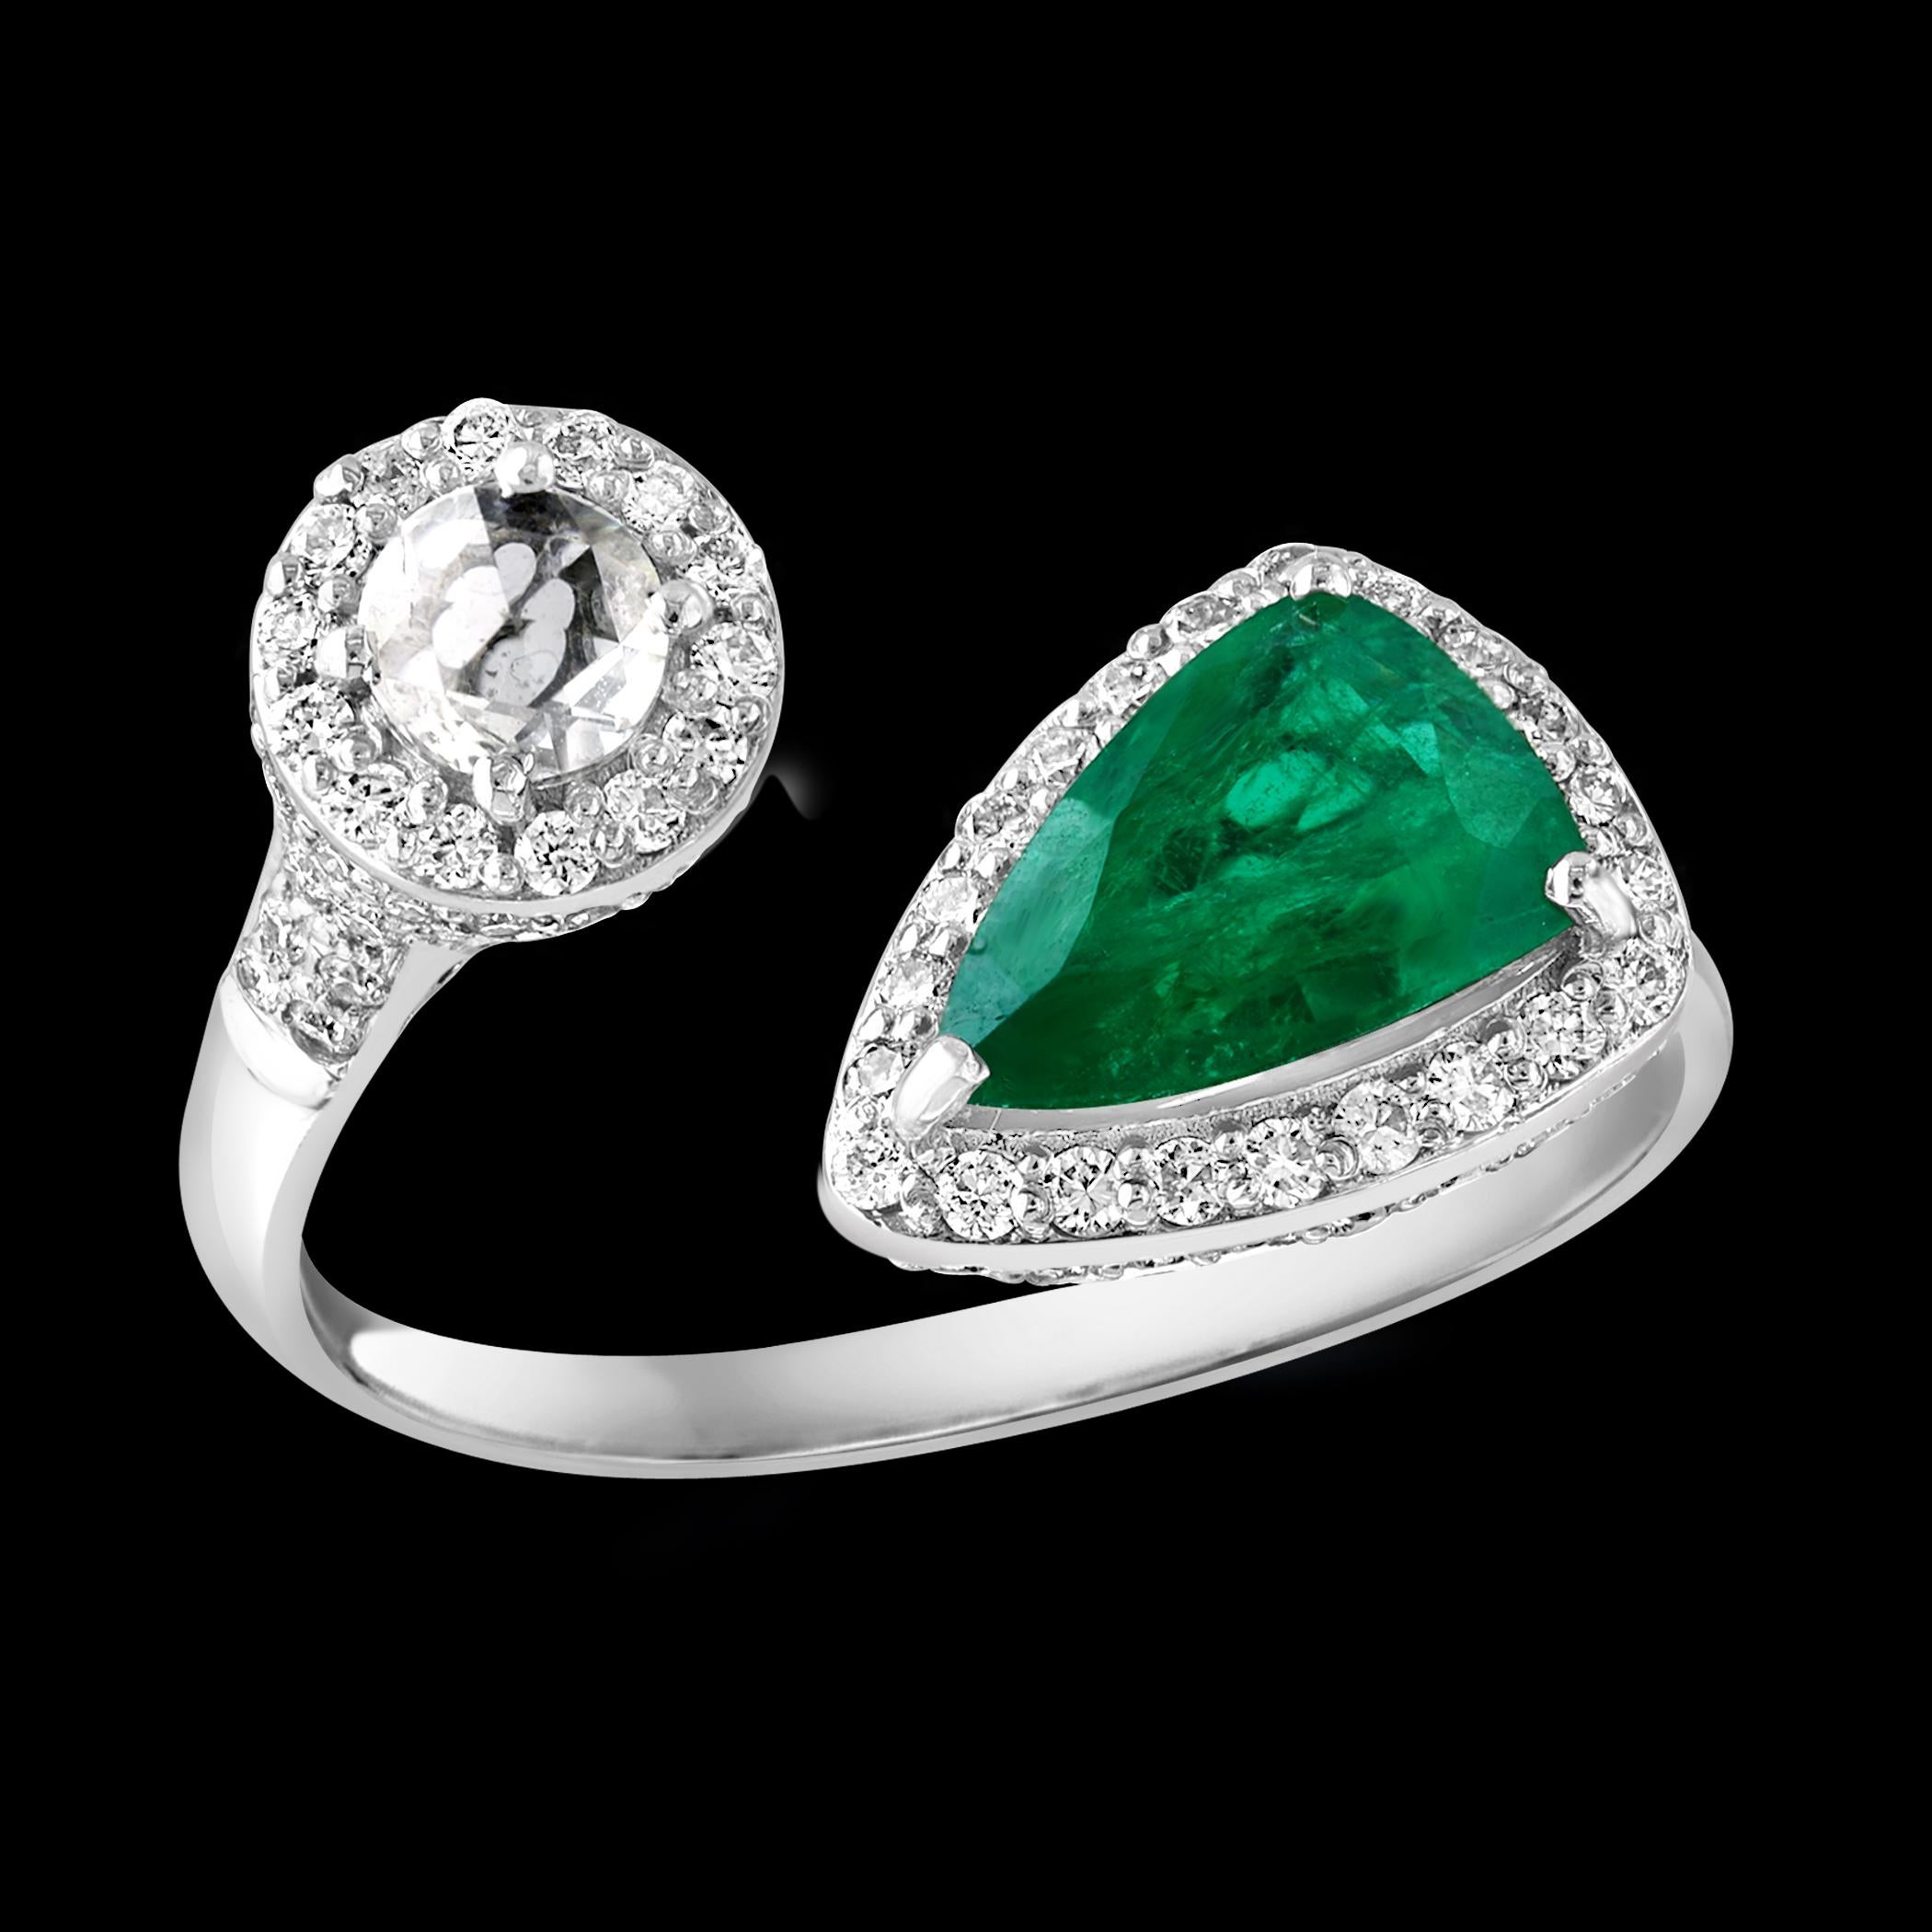 1.5 Ct Finest Emerald in Pear Shape & 1 Ct Diamond Ring in 18 Kt Gold Size 8

A Classic, pear-shaped emerald ring featuring a stunning 1.5 Ct finest Colombian emerald. This exquisite emerald is highly desirable due to its exceptional color, fine